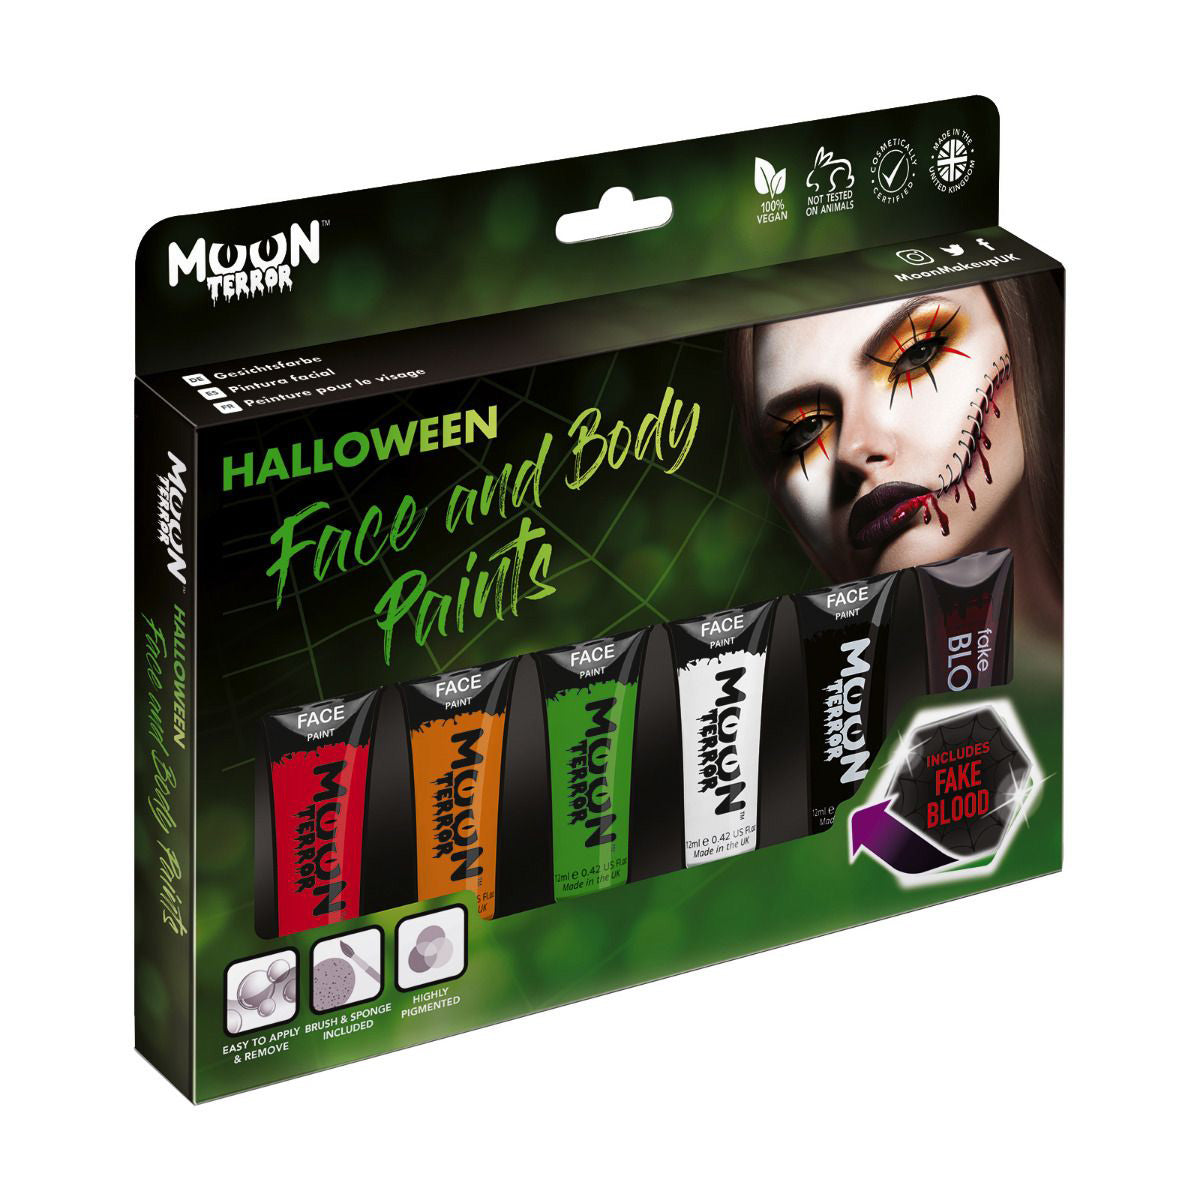 Halloween Face & Body Paint Makeup Boxset - 5 tubes, blood, brush, spnge. Cosmetically certified, FDA & Health Canada compliant, cruelty free and vegan.